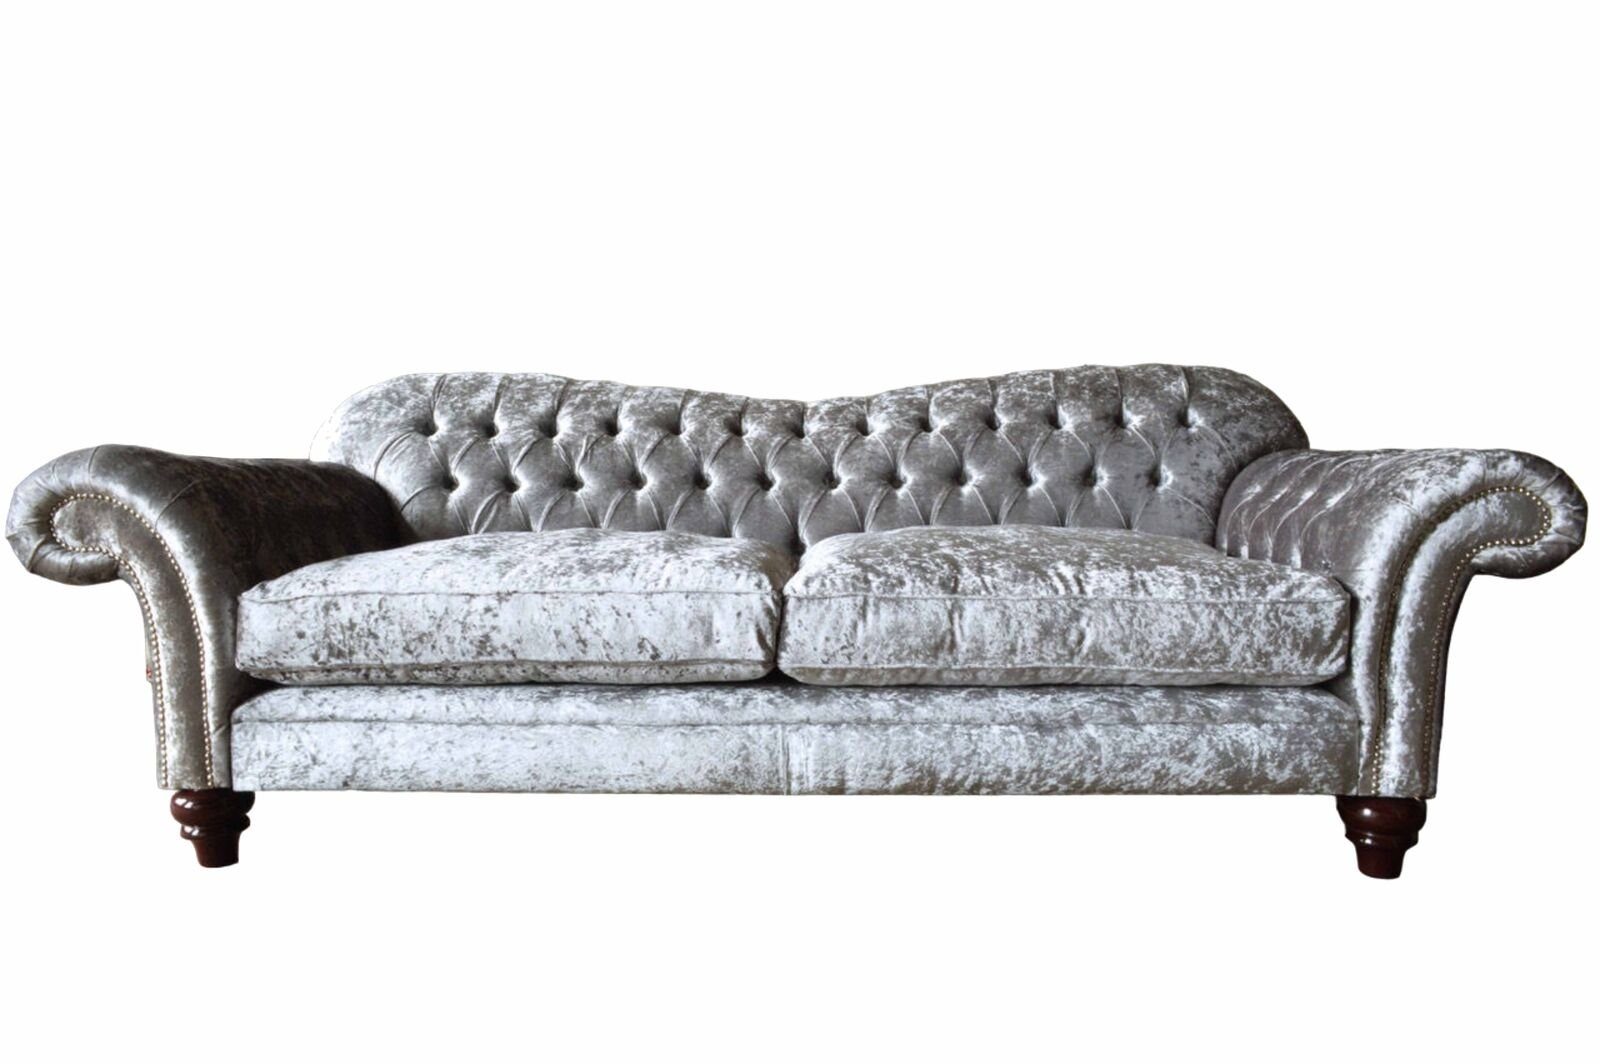 JVmoebel Sofa Chesterfield Samt Sofa 3 Sitzer Design Couch Grau Textil, Made in Europe